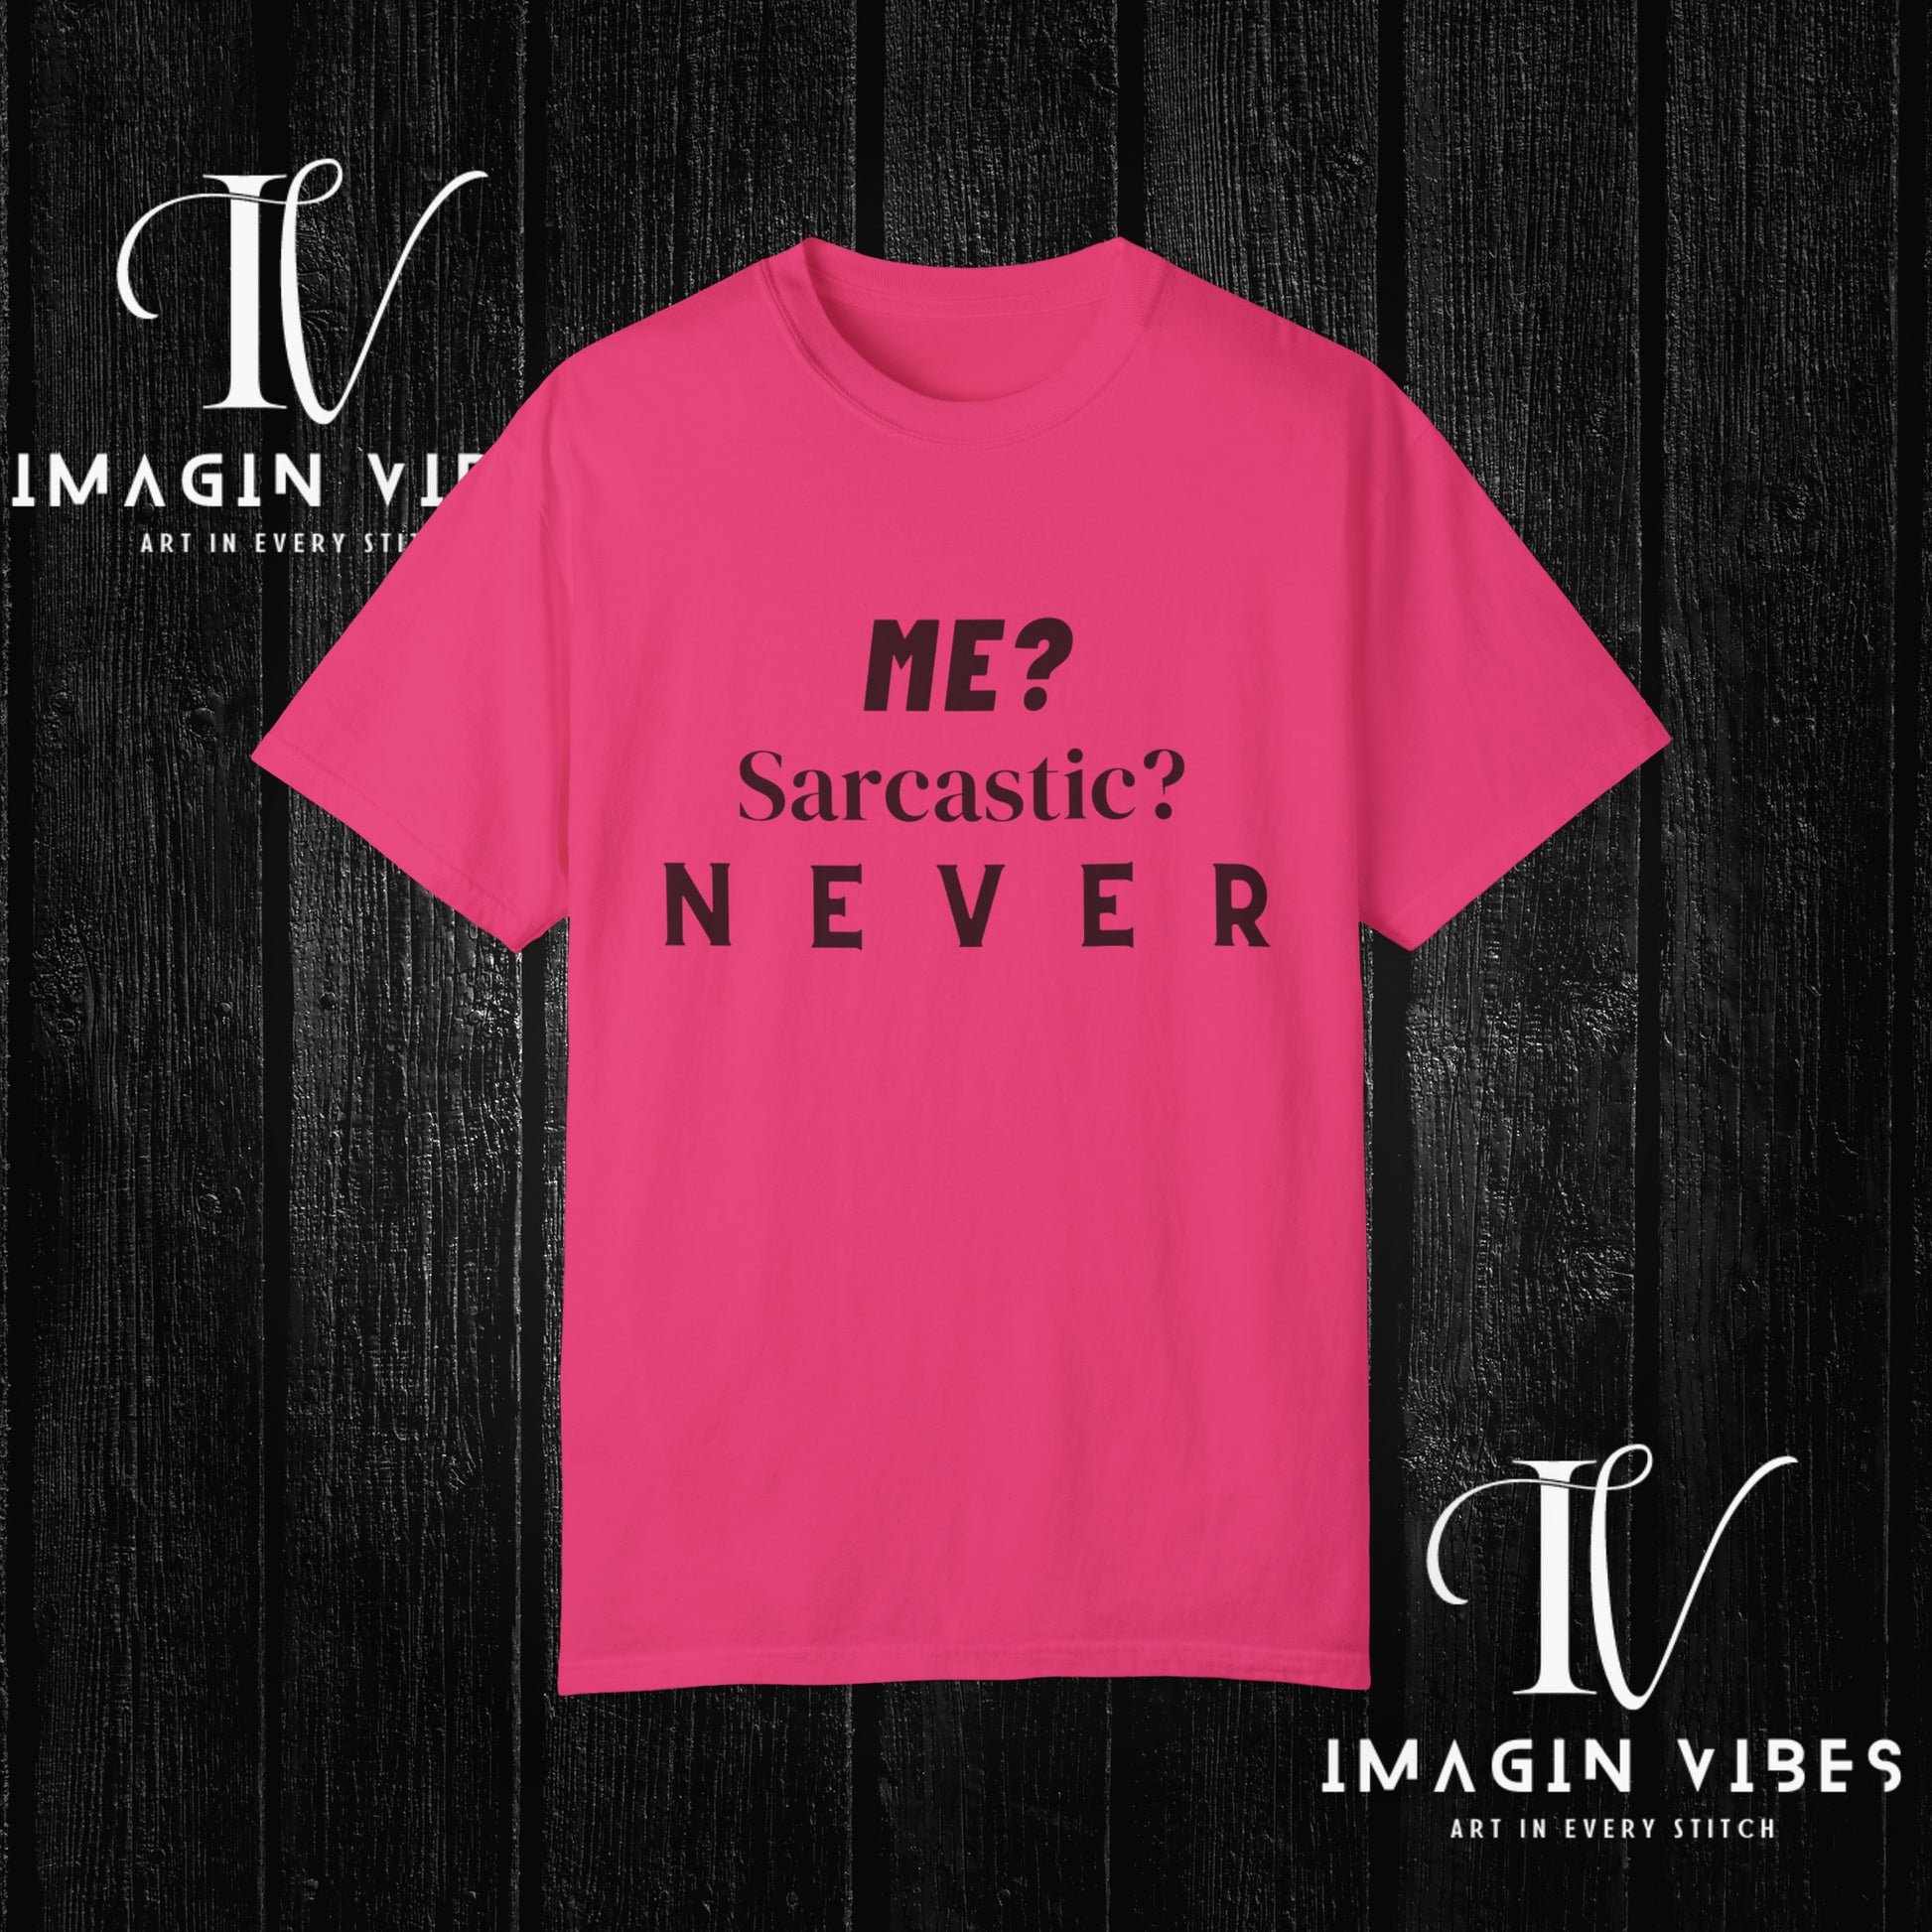 Me? Sarcastic? Never T-Shirt - Unisex Tee - Funny Sarcastic Shirt T-Shirt Heliconia S 